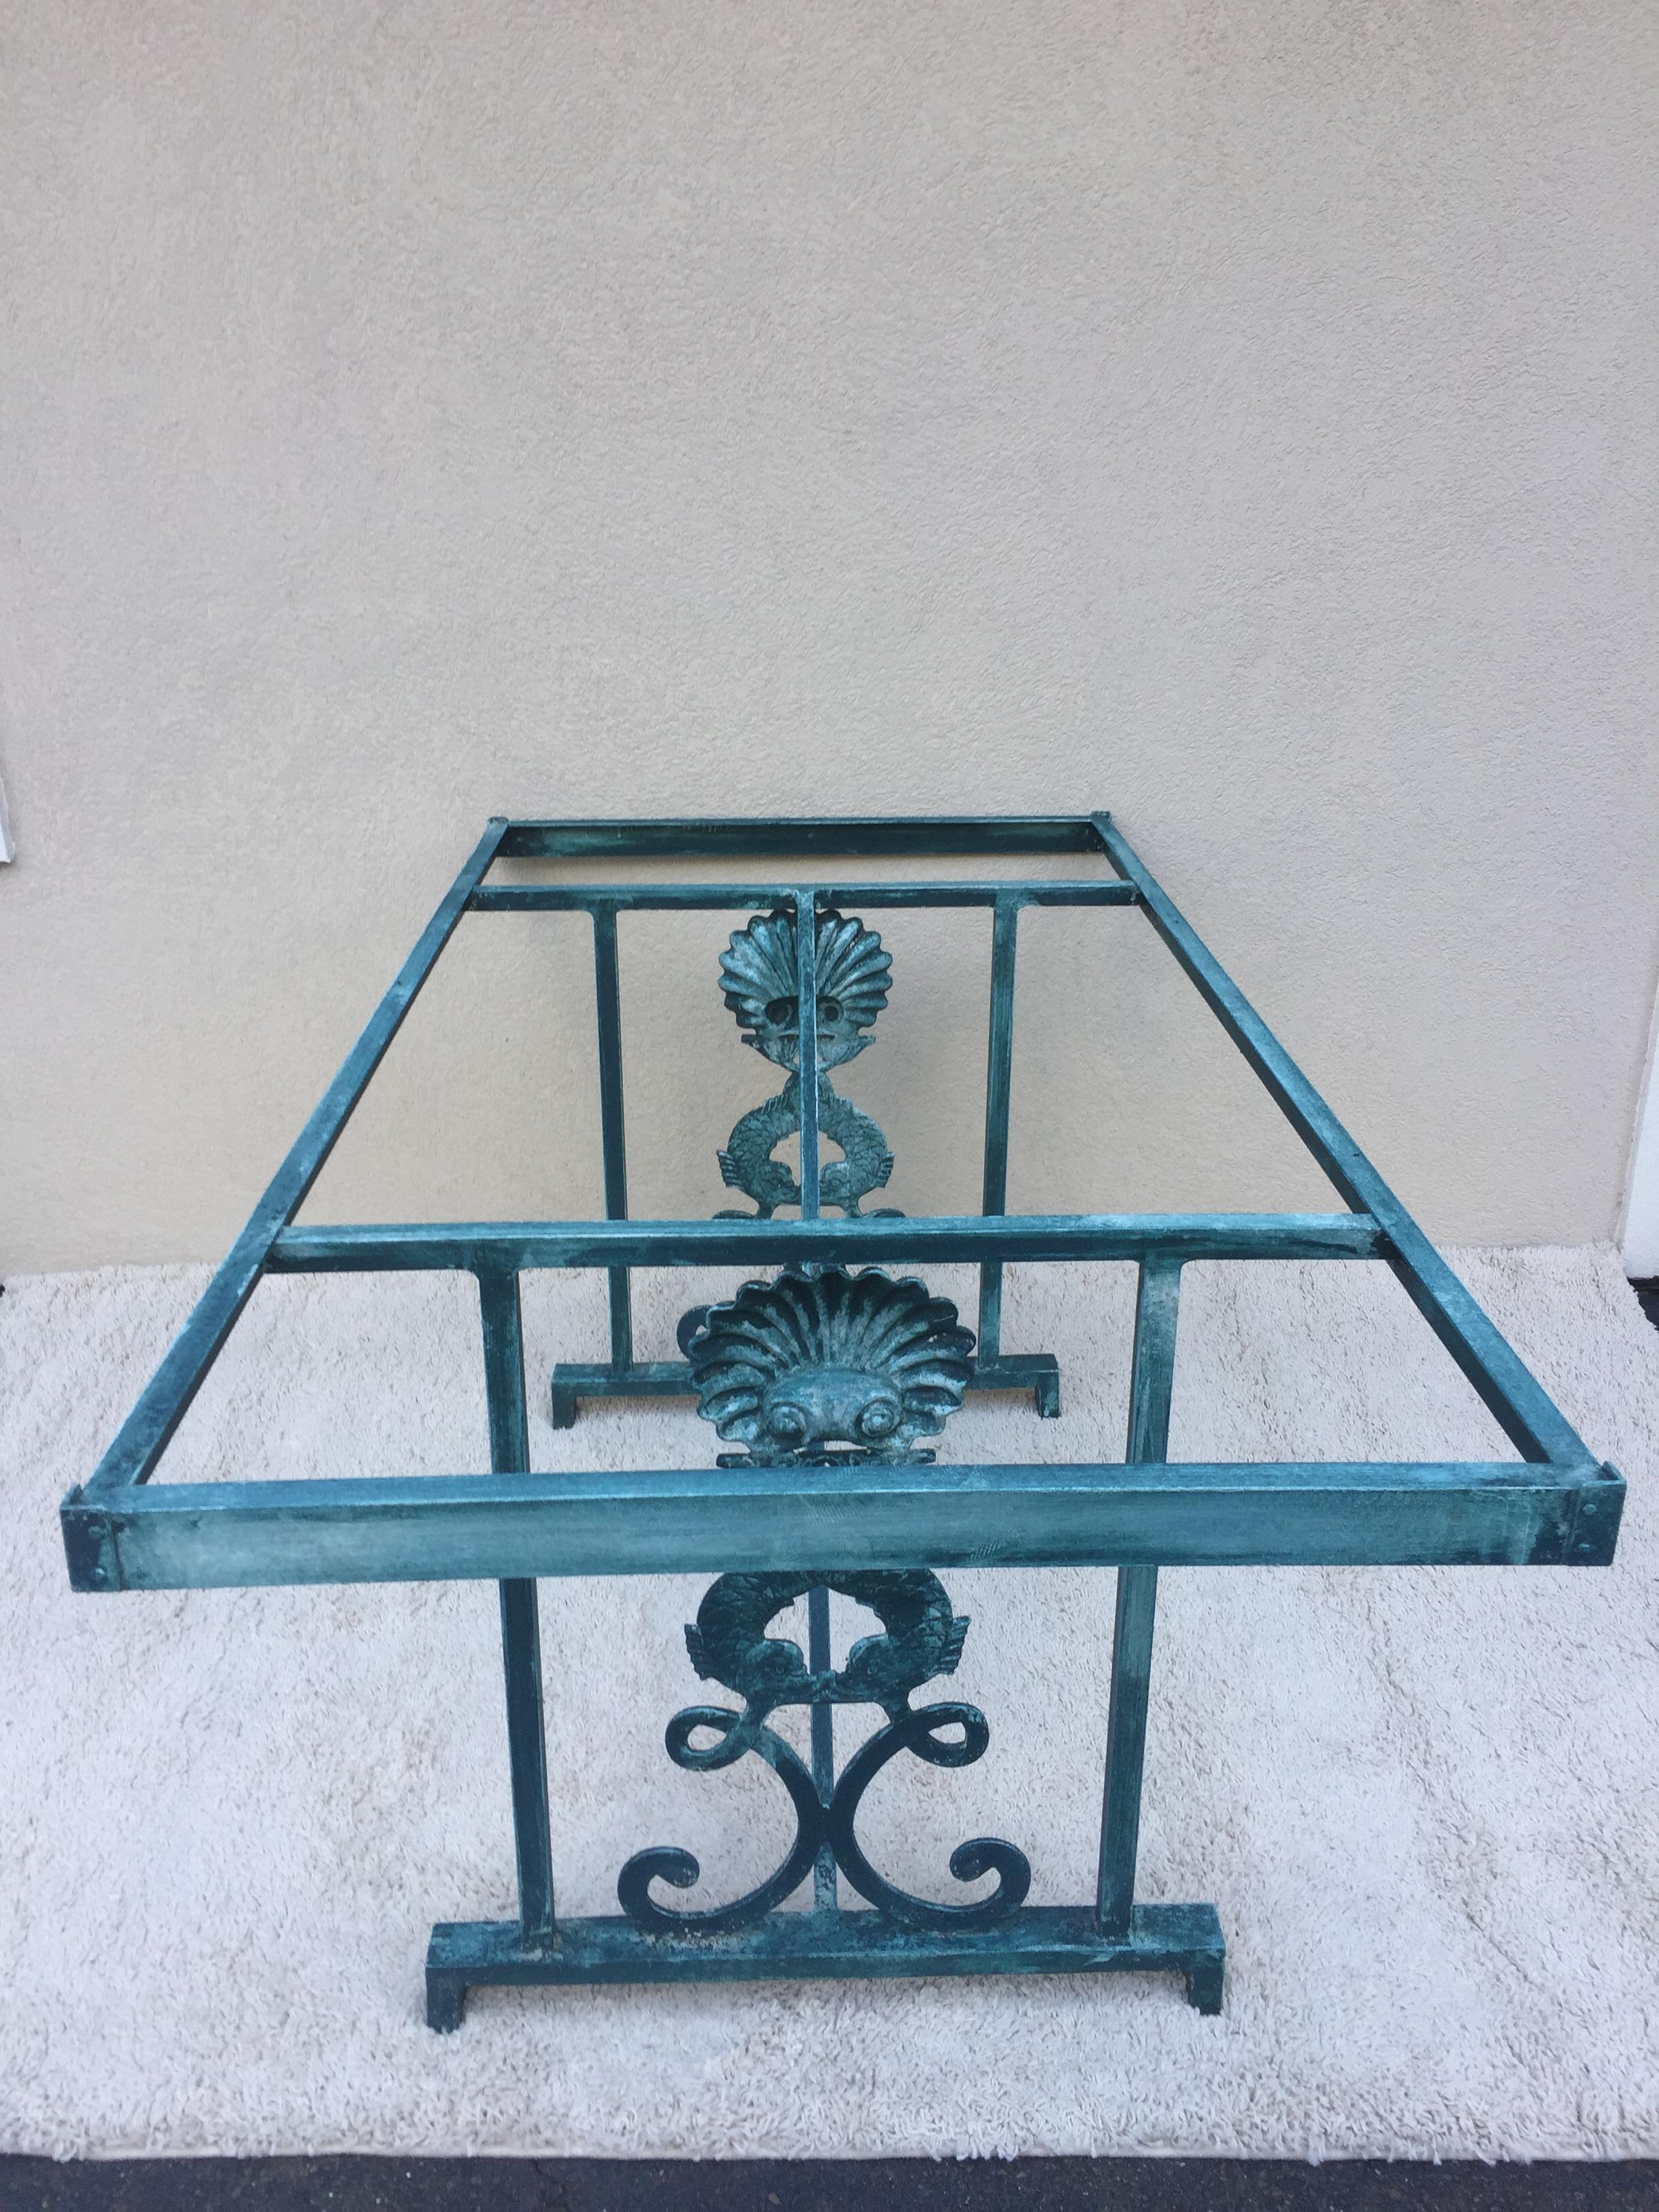 Turquoise finished aluminum Glass top dolphin and sea shell designed dining Table 1/2” glass top with patinated turqouise color which is original and been glazed.